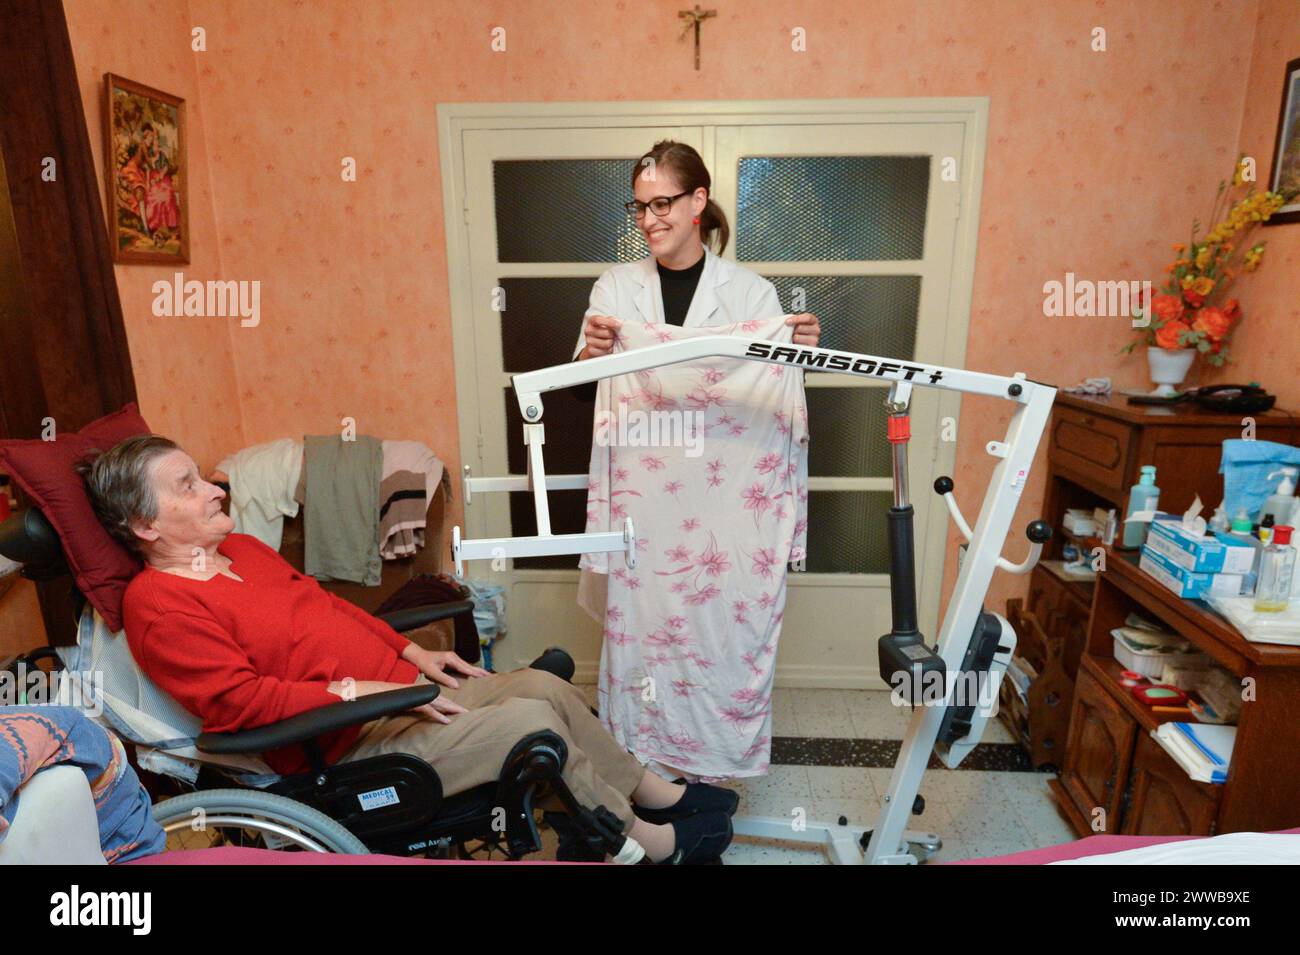 HAD (Hospitalization At Home). Follow-up of an elderly patient at home by a nurse. Stock Photo